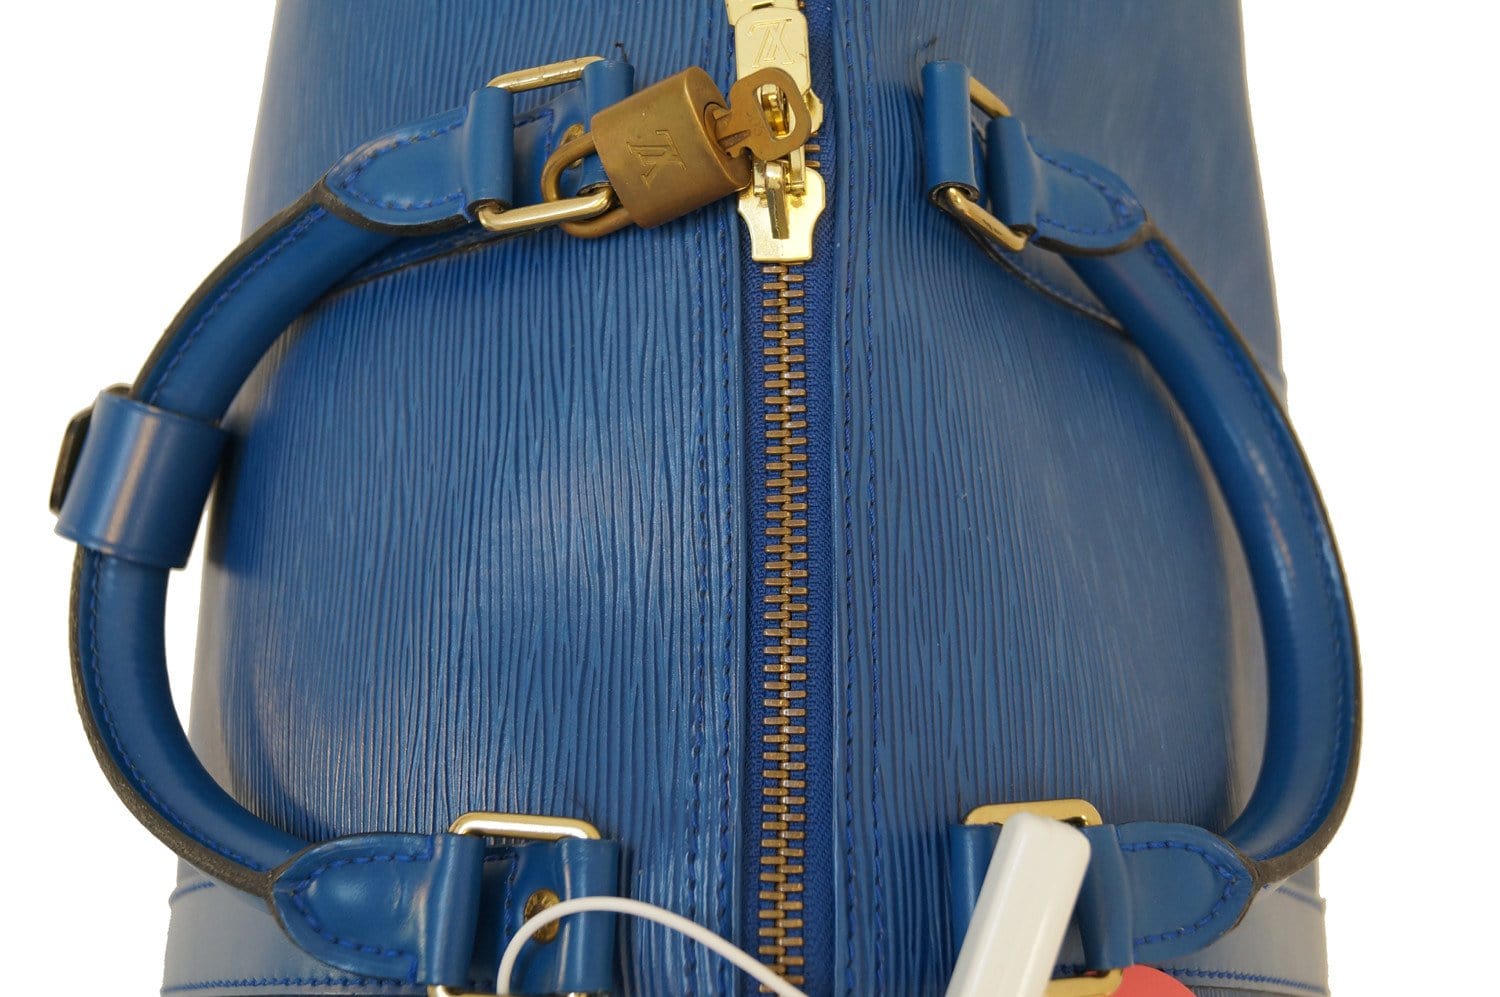 Louis Vuitton Keepall Editions Limitées Travel Bag in Blue Shading